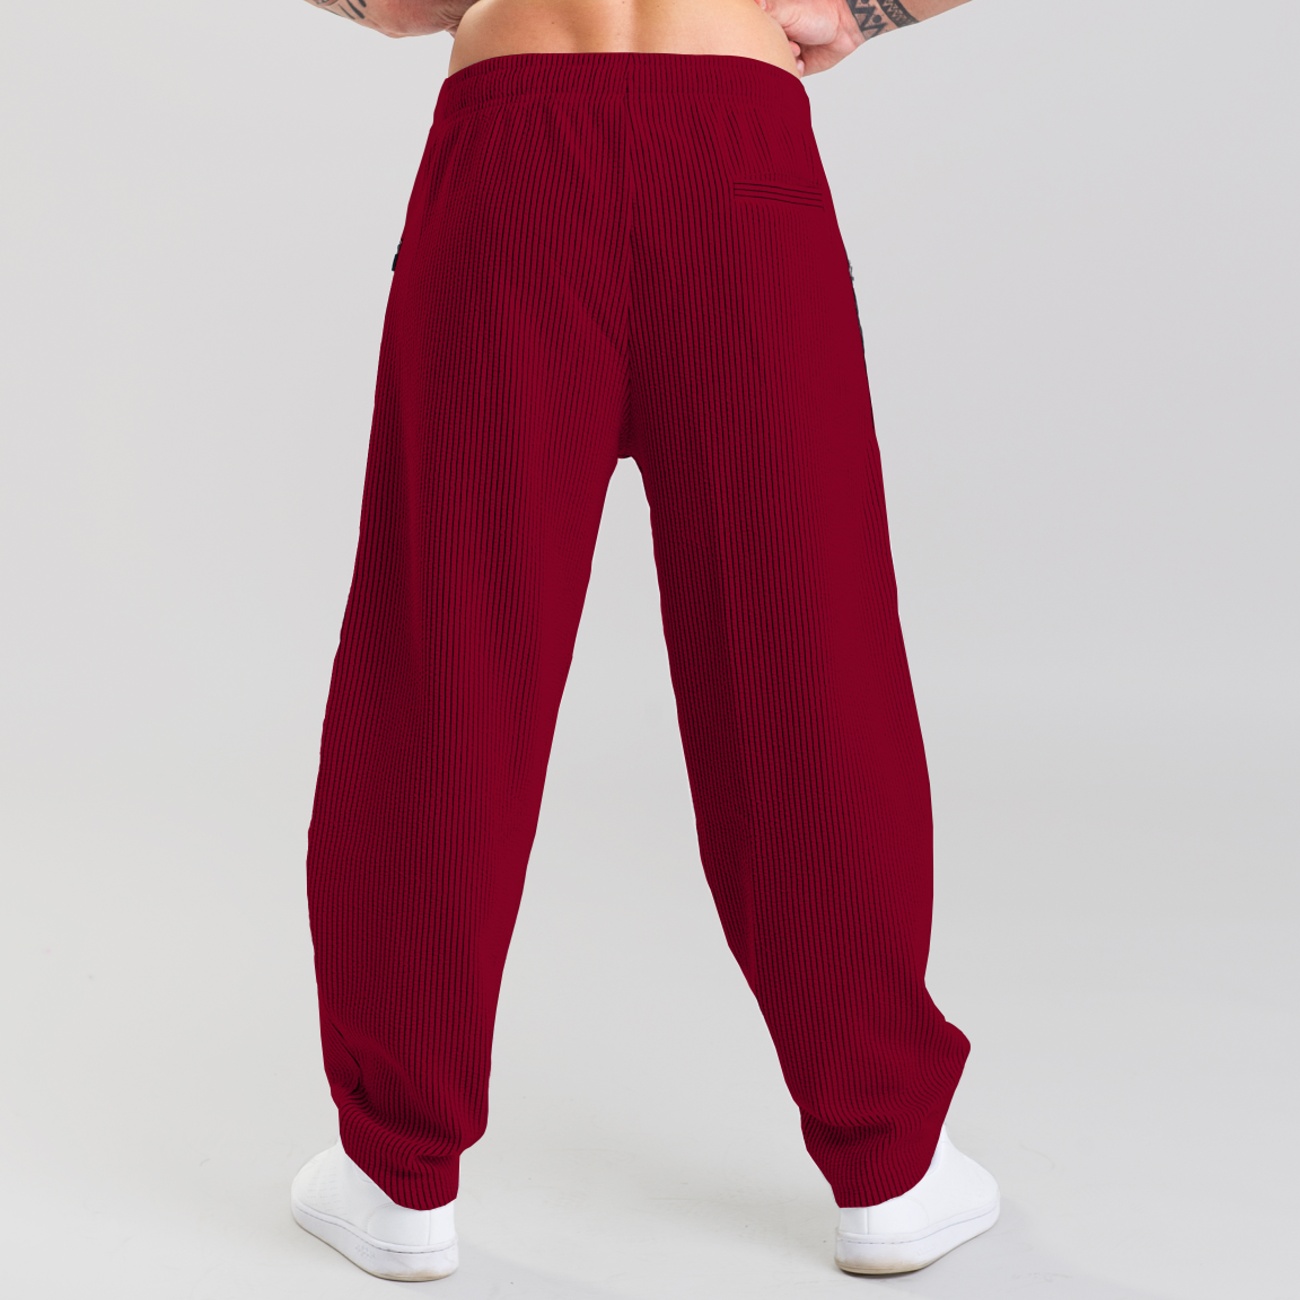 HAMMER-PANTS-02-RED-1